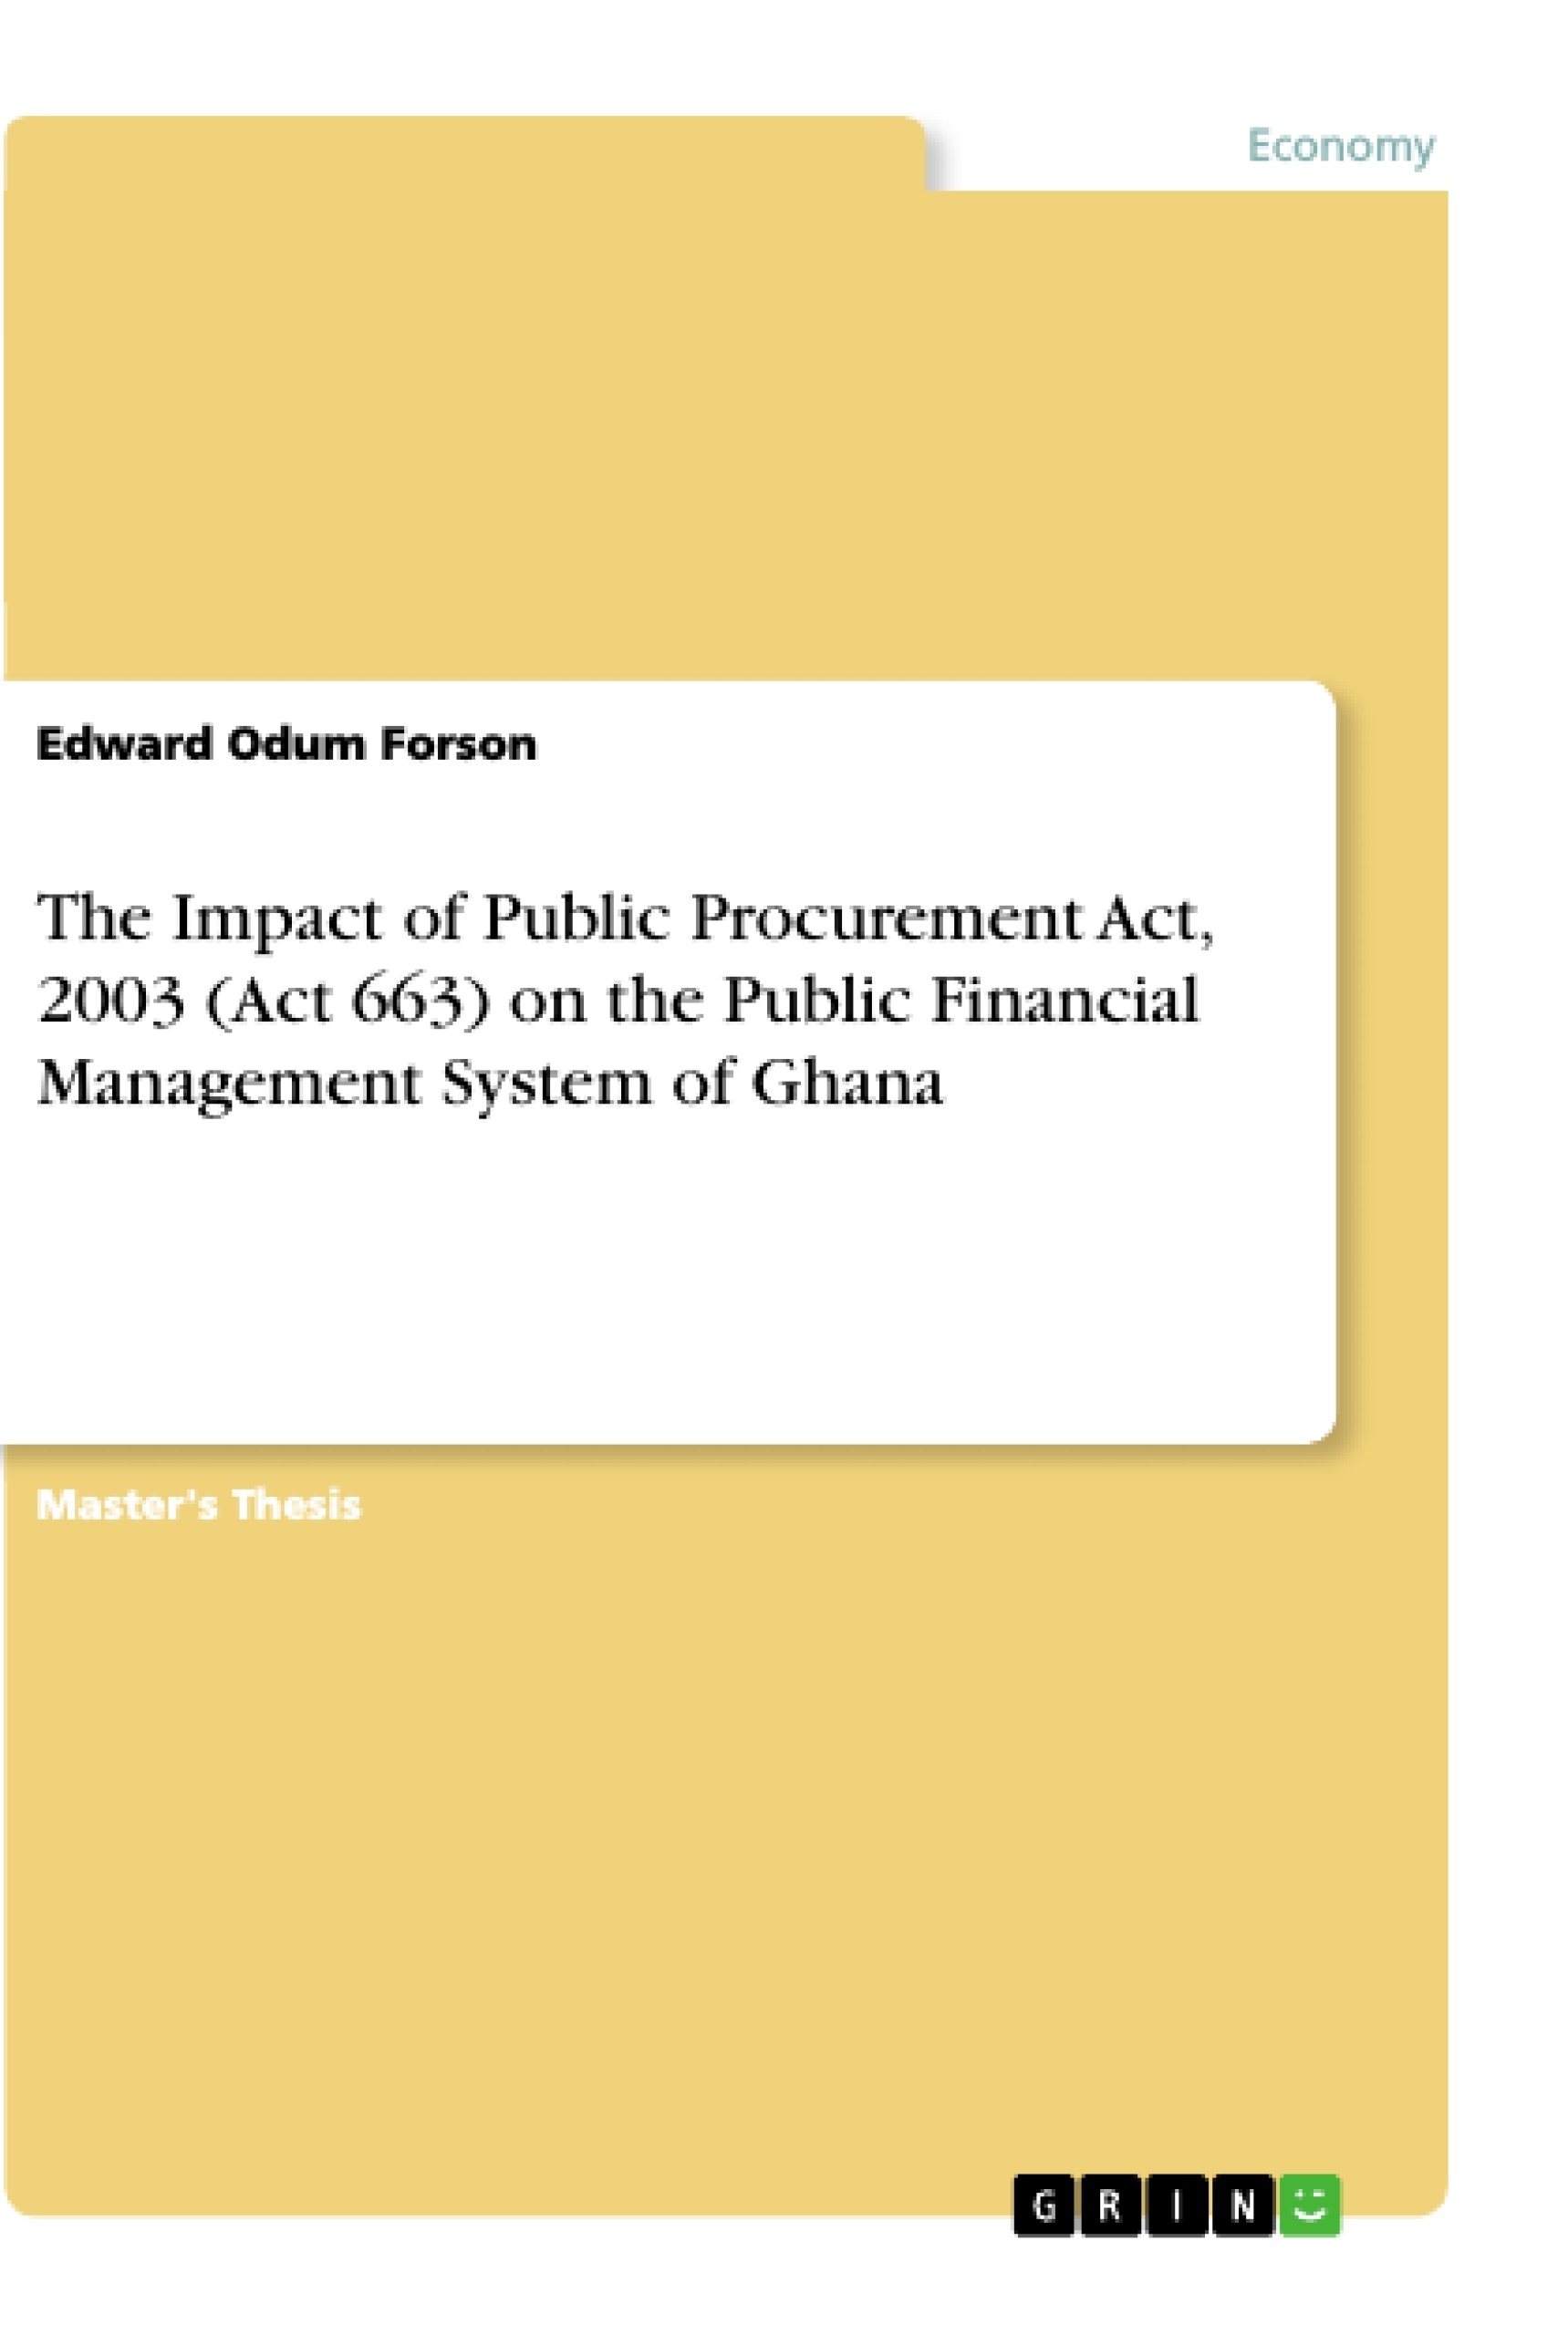 The Impact of Public Procurement Act, 2003 (Act 663) on the Public